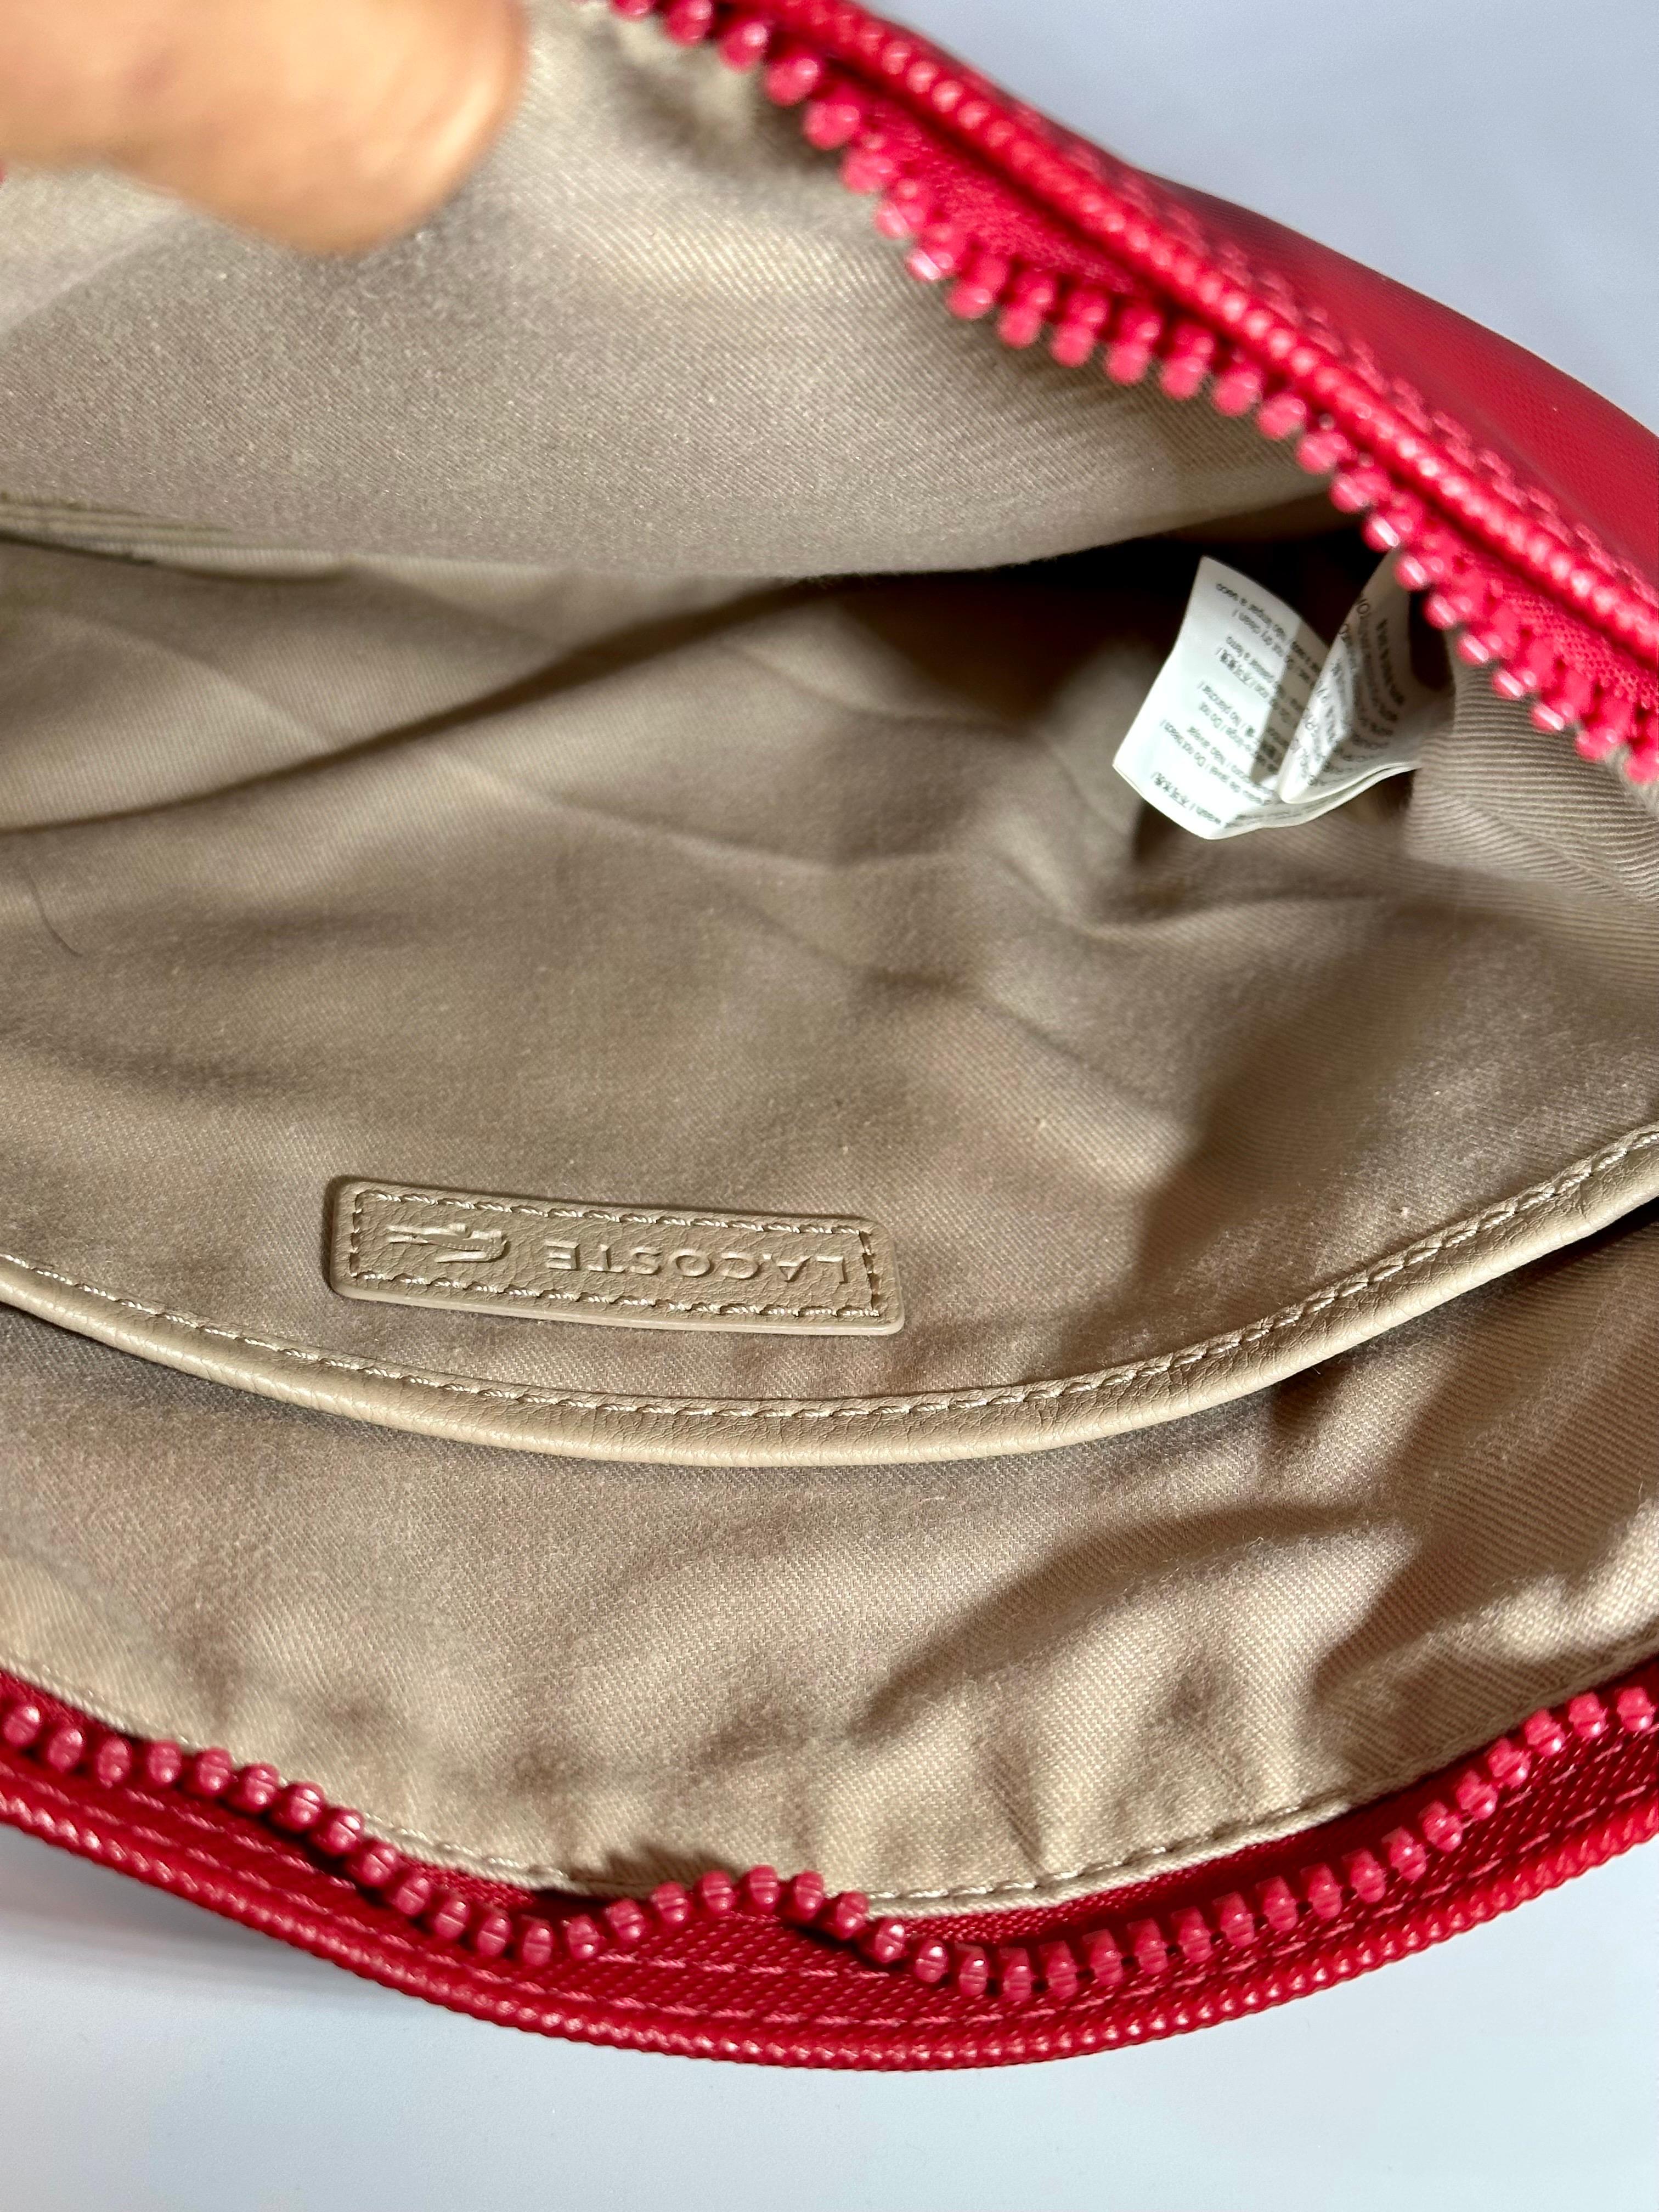 lacoste flap crossover bag